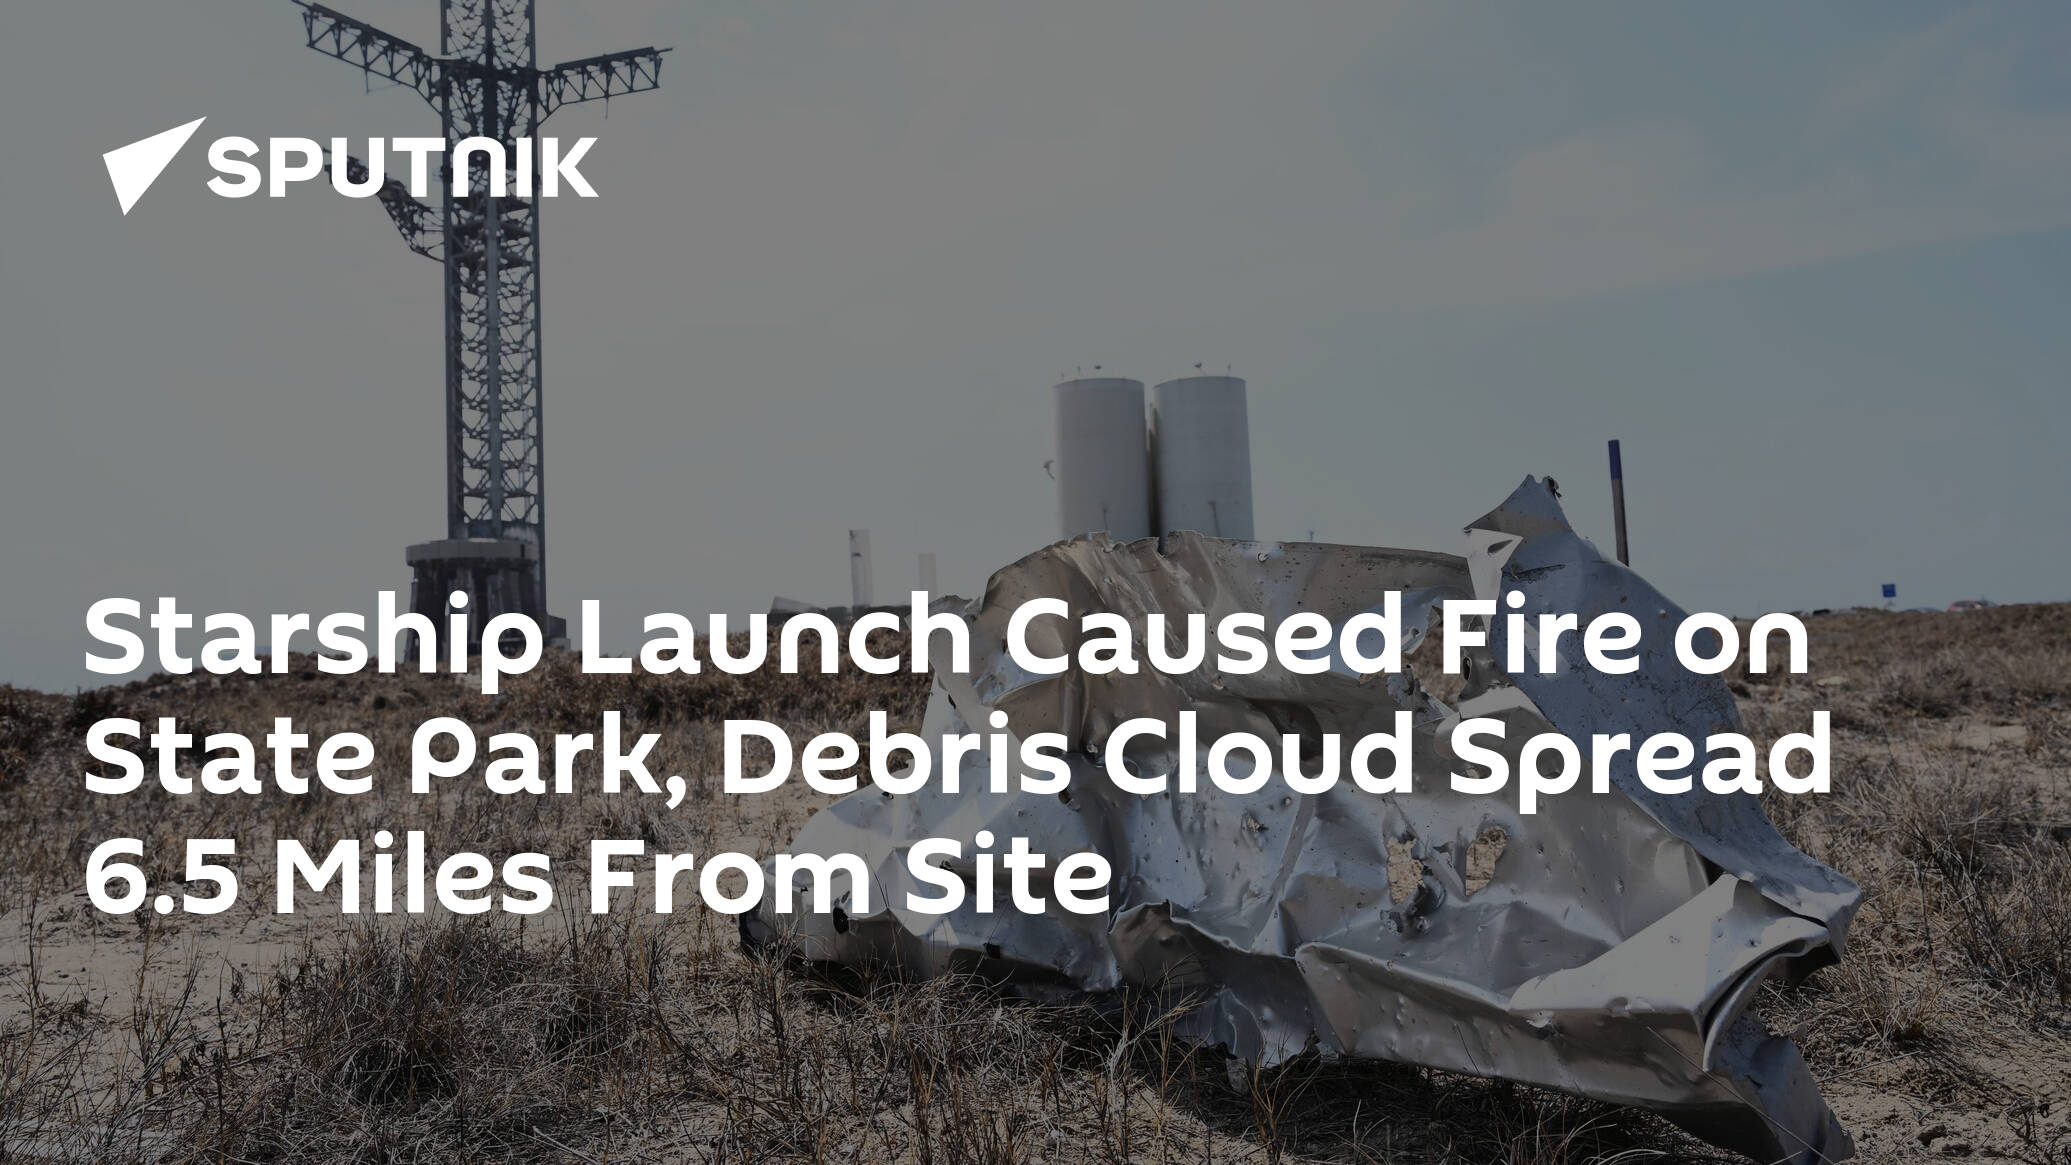 Starship Launch Caused Fire on State Park, Debris Cloud Spread 6.5 Miles From Site